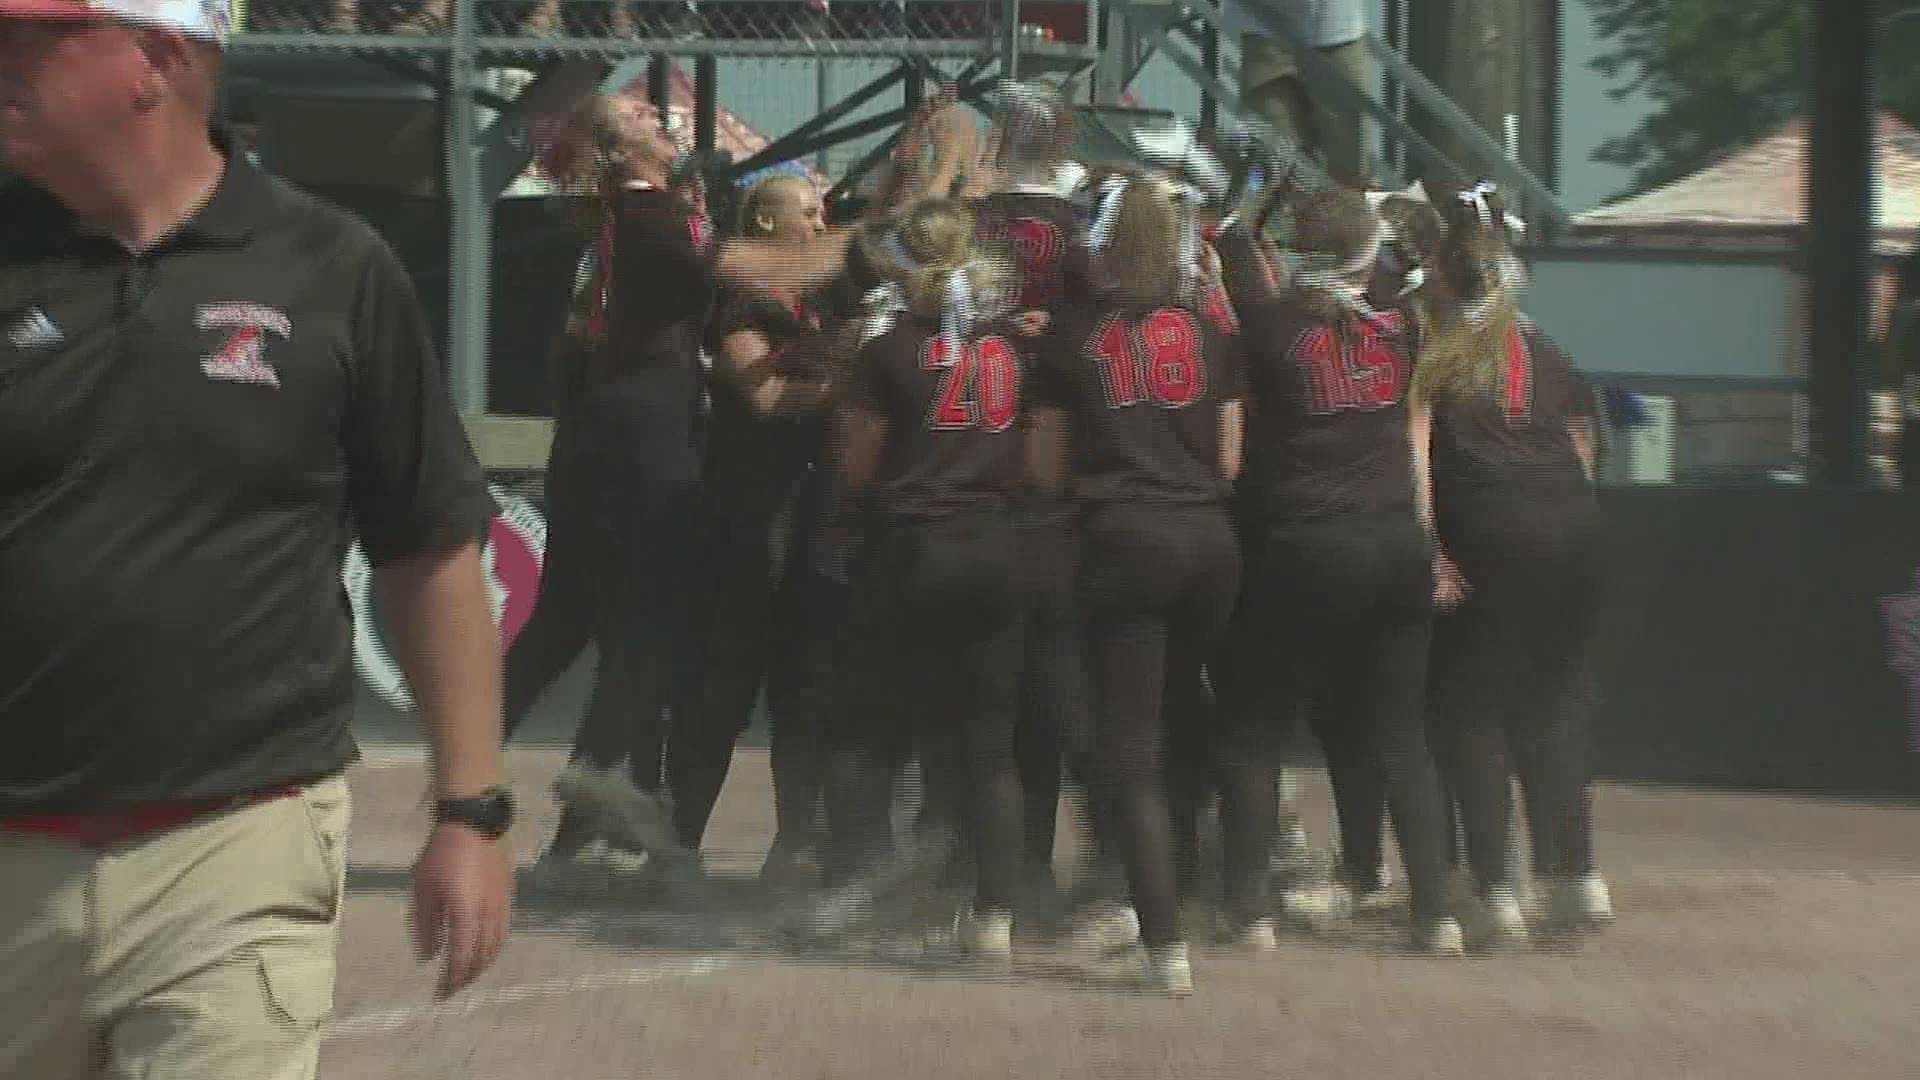 Assumption takes on Mount Vernon in the 3A State softball championships match in WQAD sports coverage.